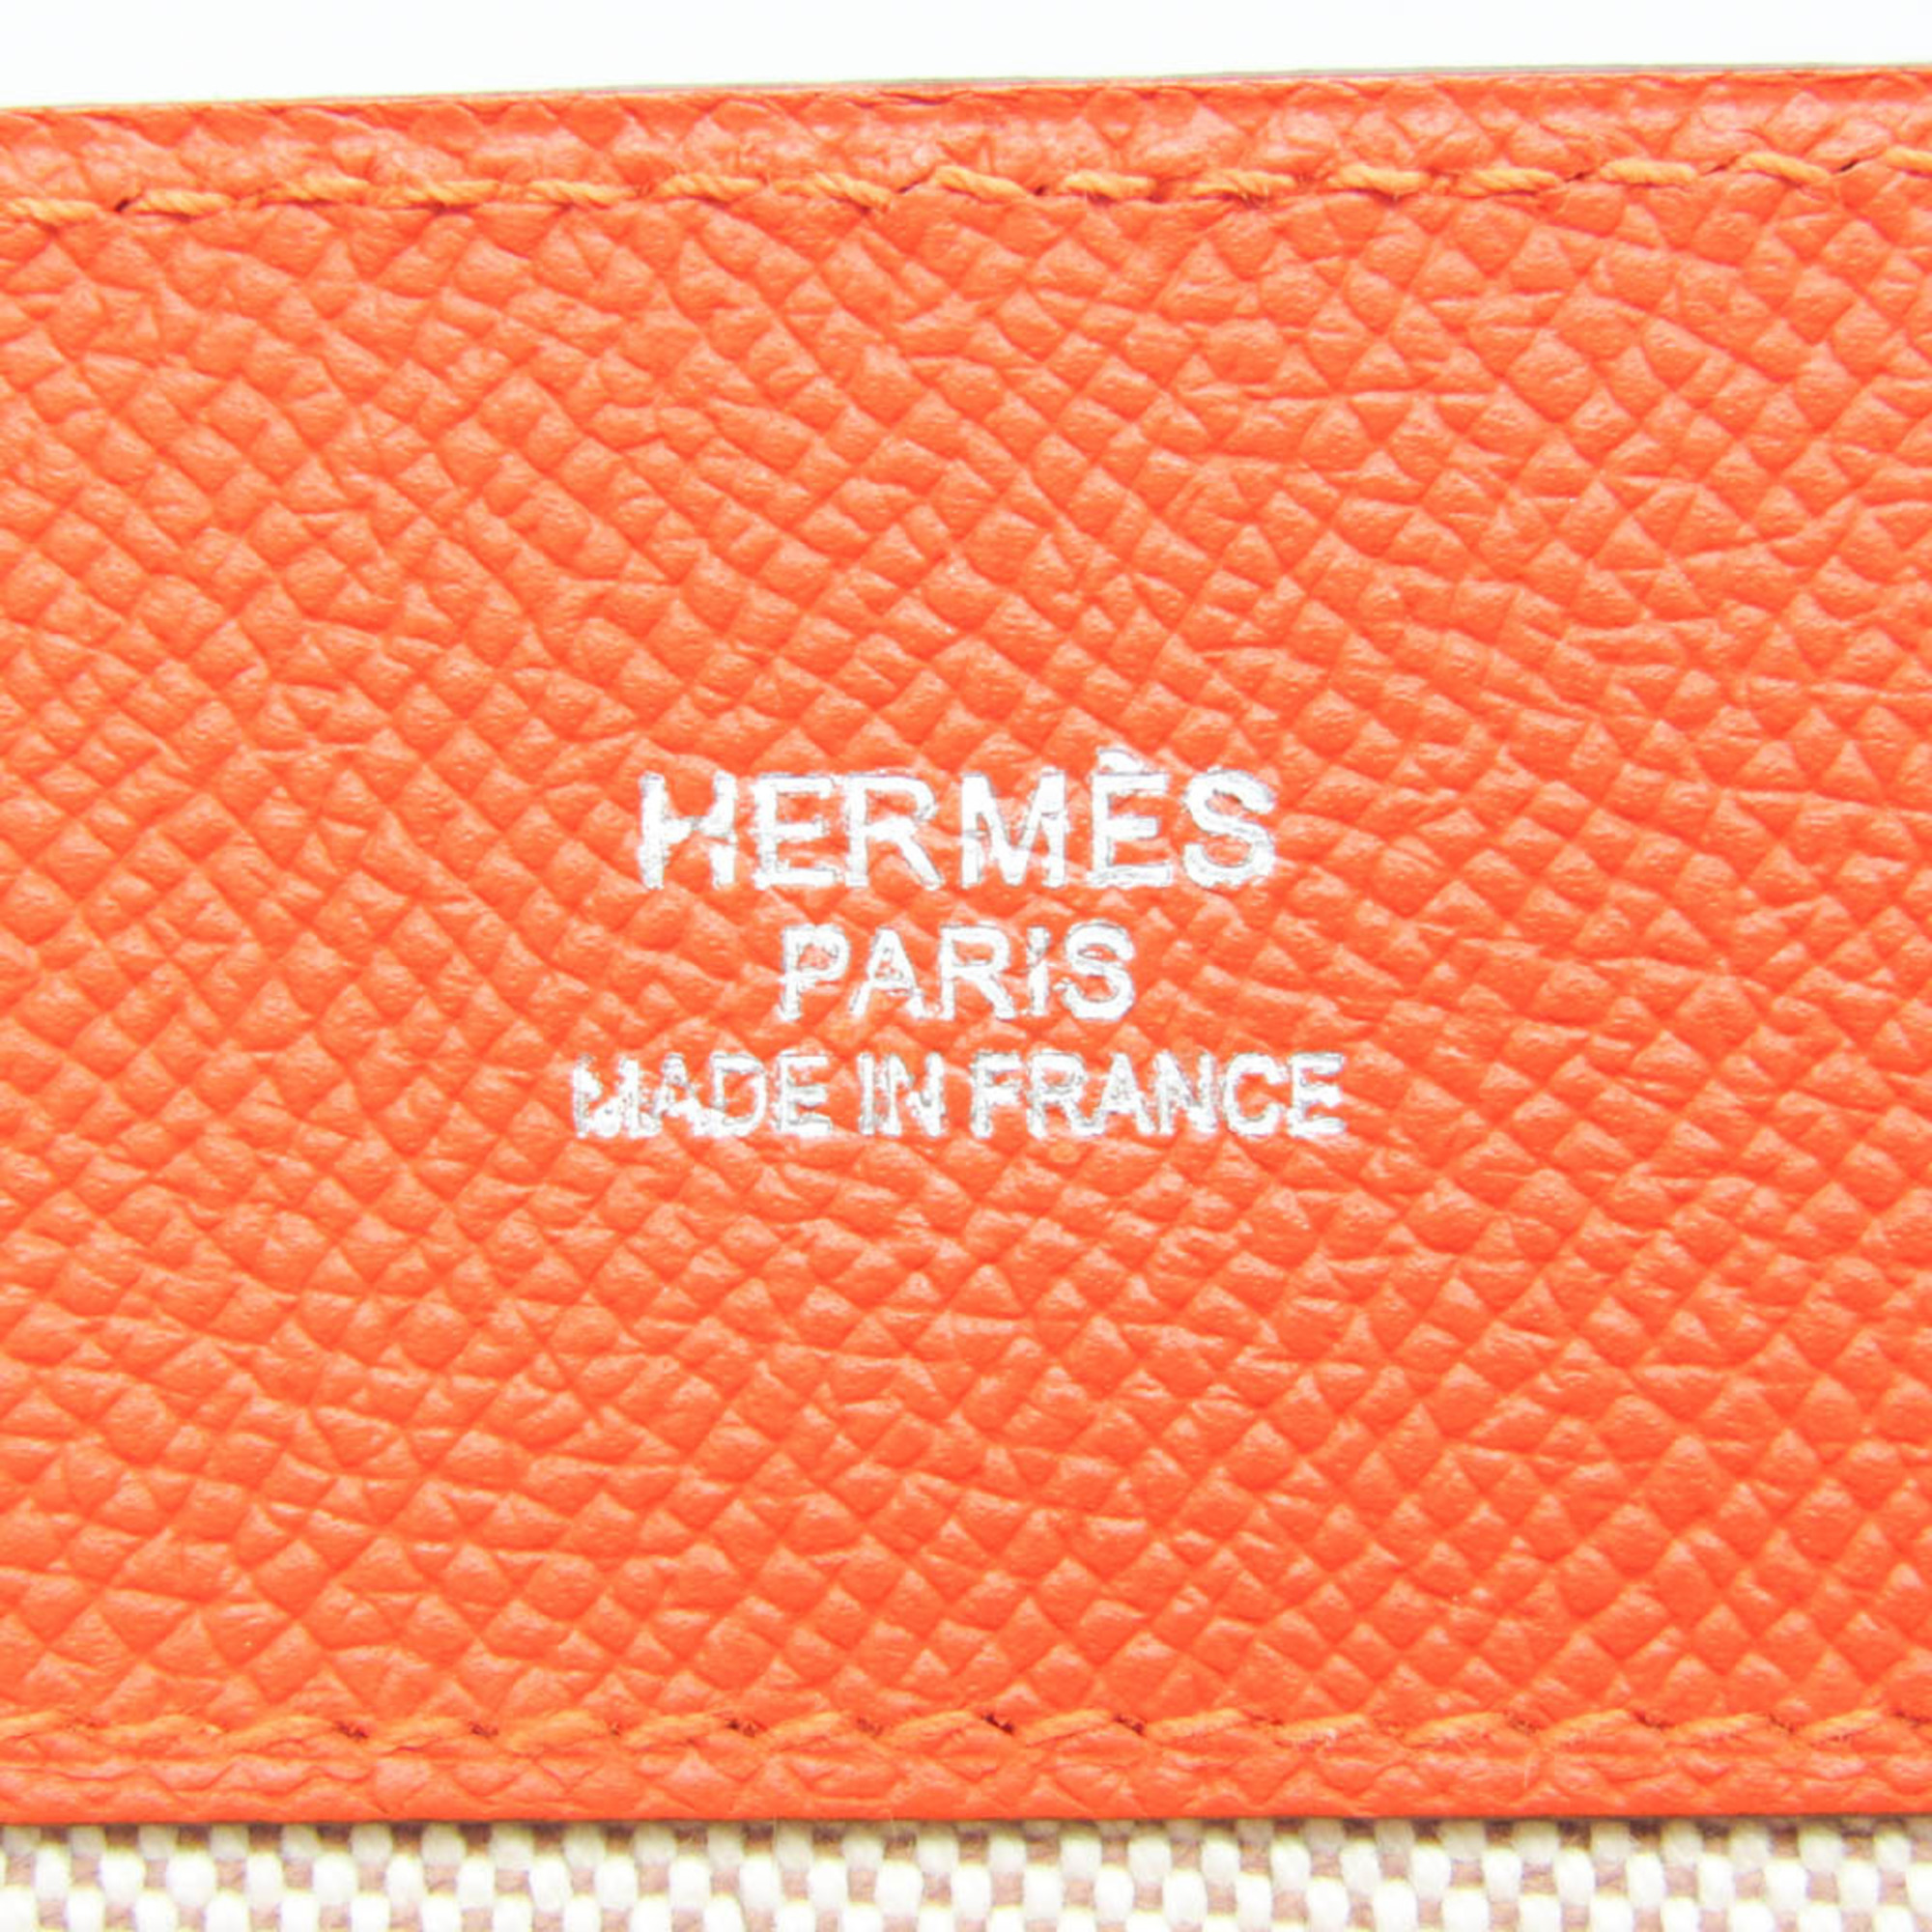 Hermes Maxi Box Cabas 36 Women's Epsom Leather,Suede Tote Bag Brown,Orange